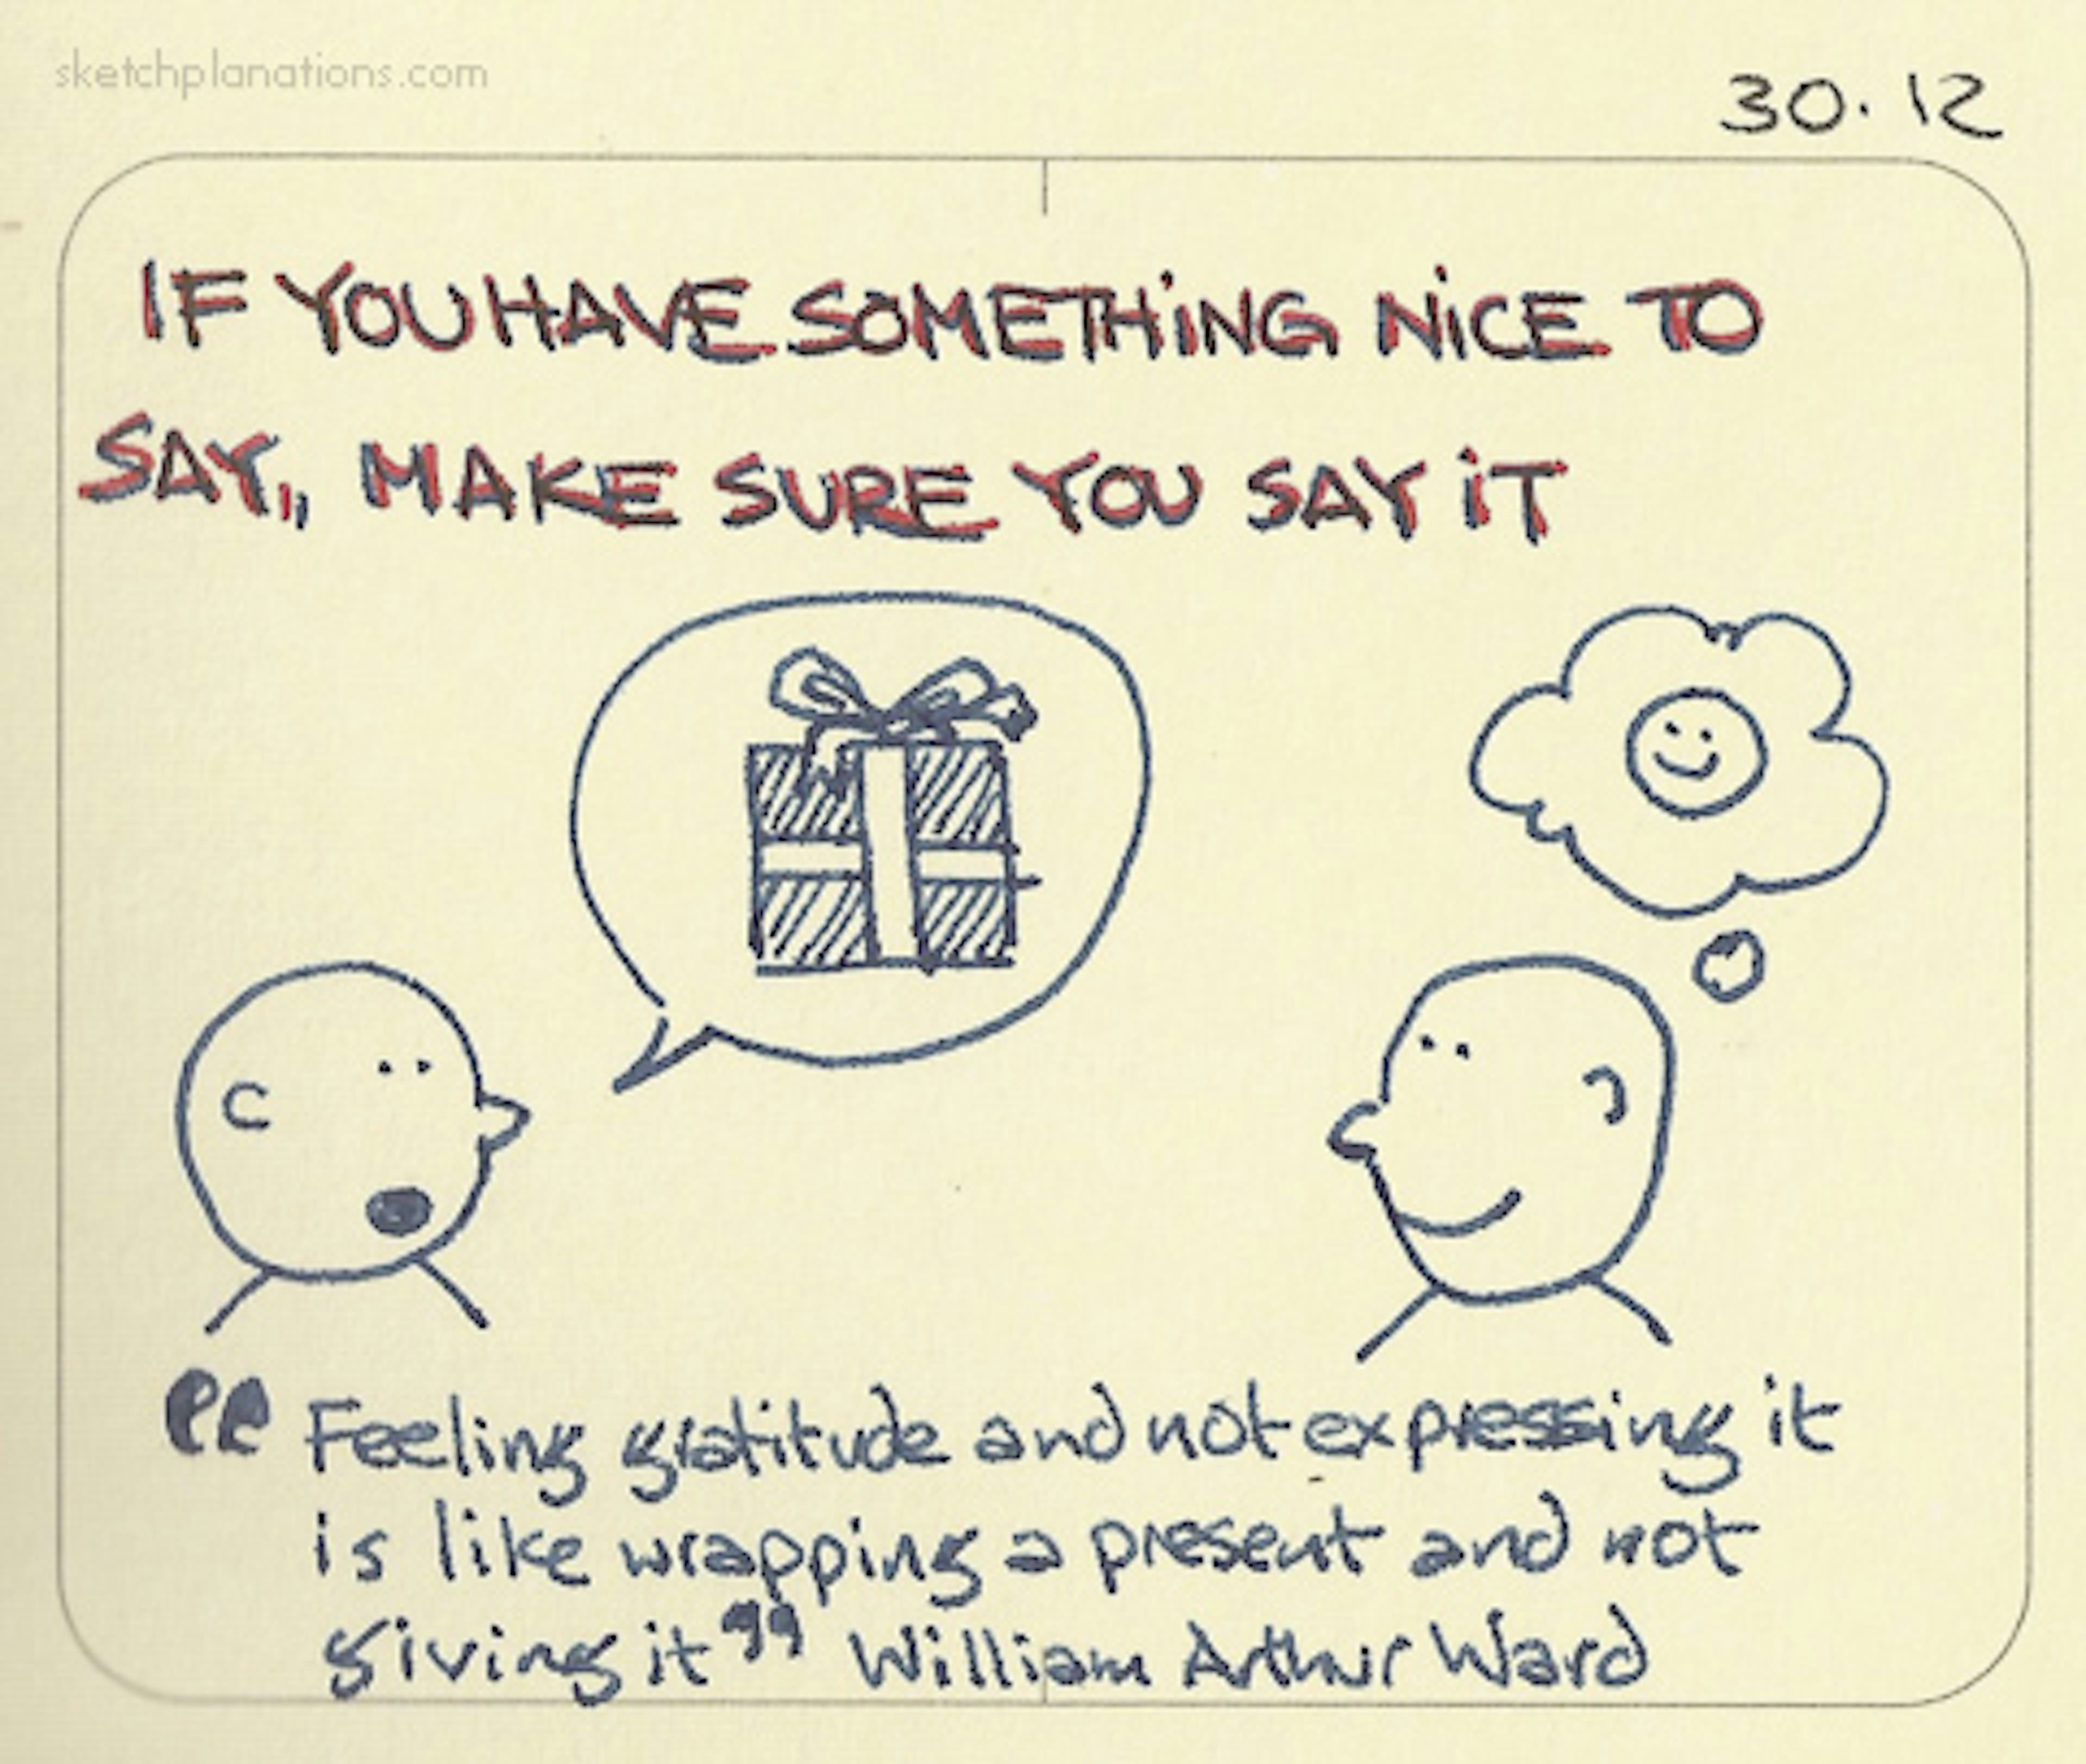 If you have something nice to say, make sure you say it - Sketchplanations